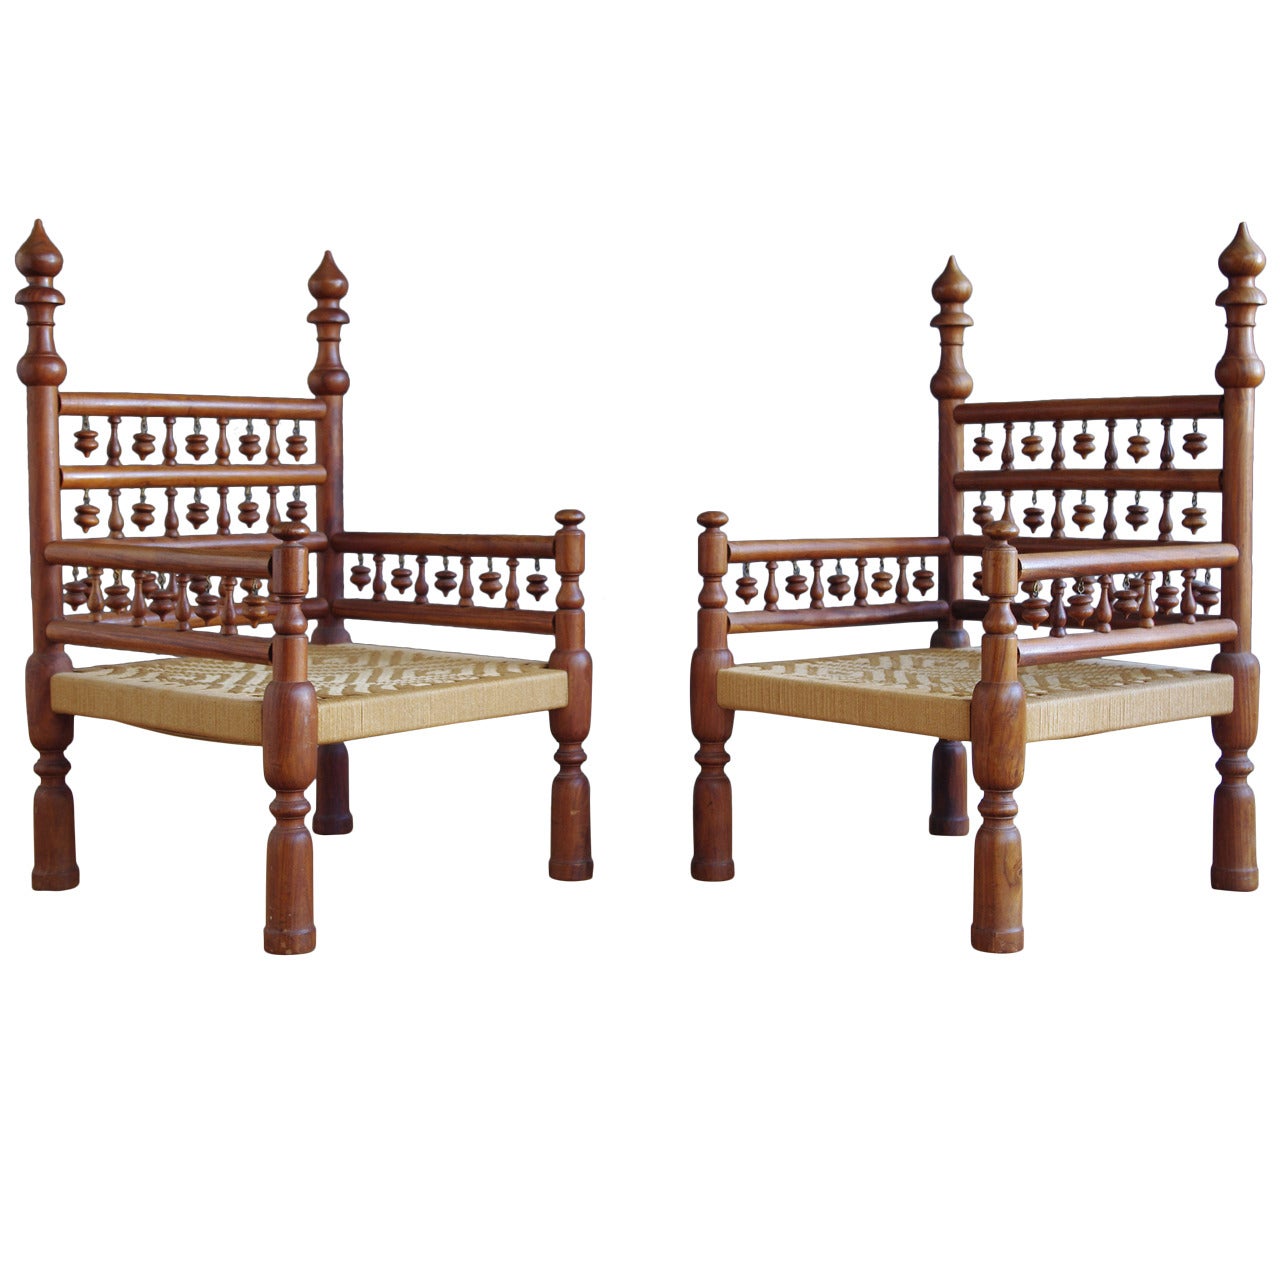 Pair of Low Indian Wedding Chairs For Sale